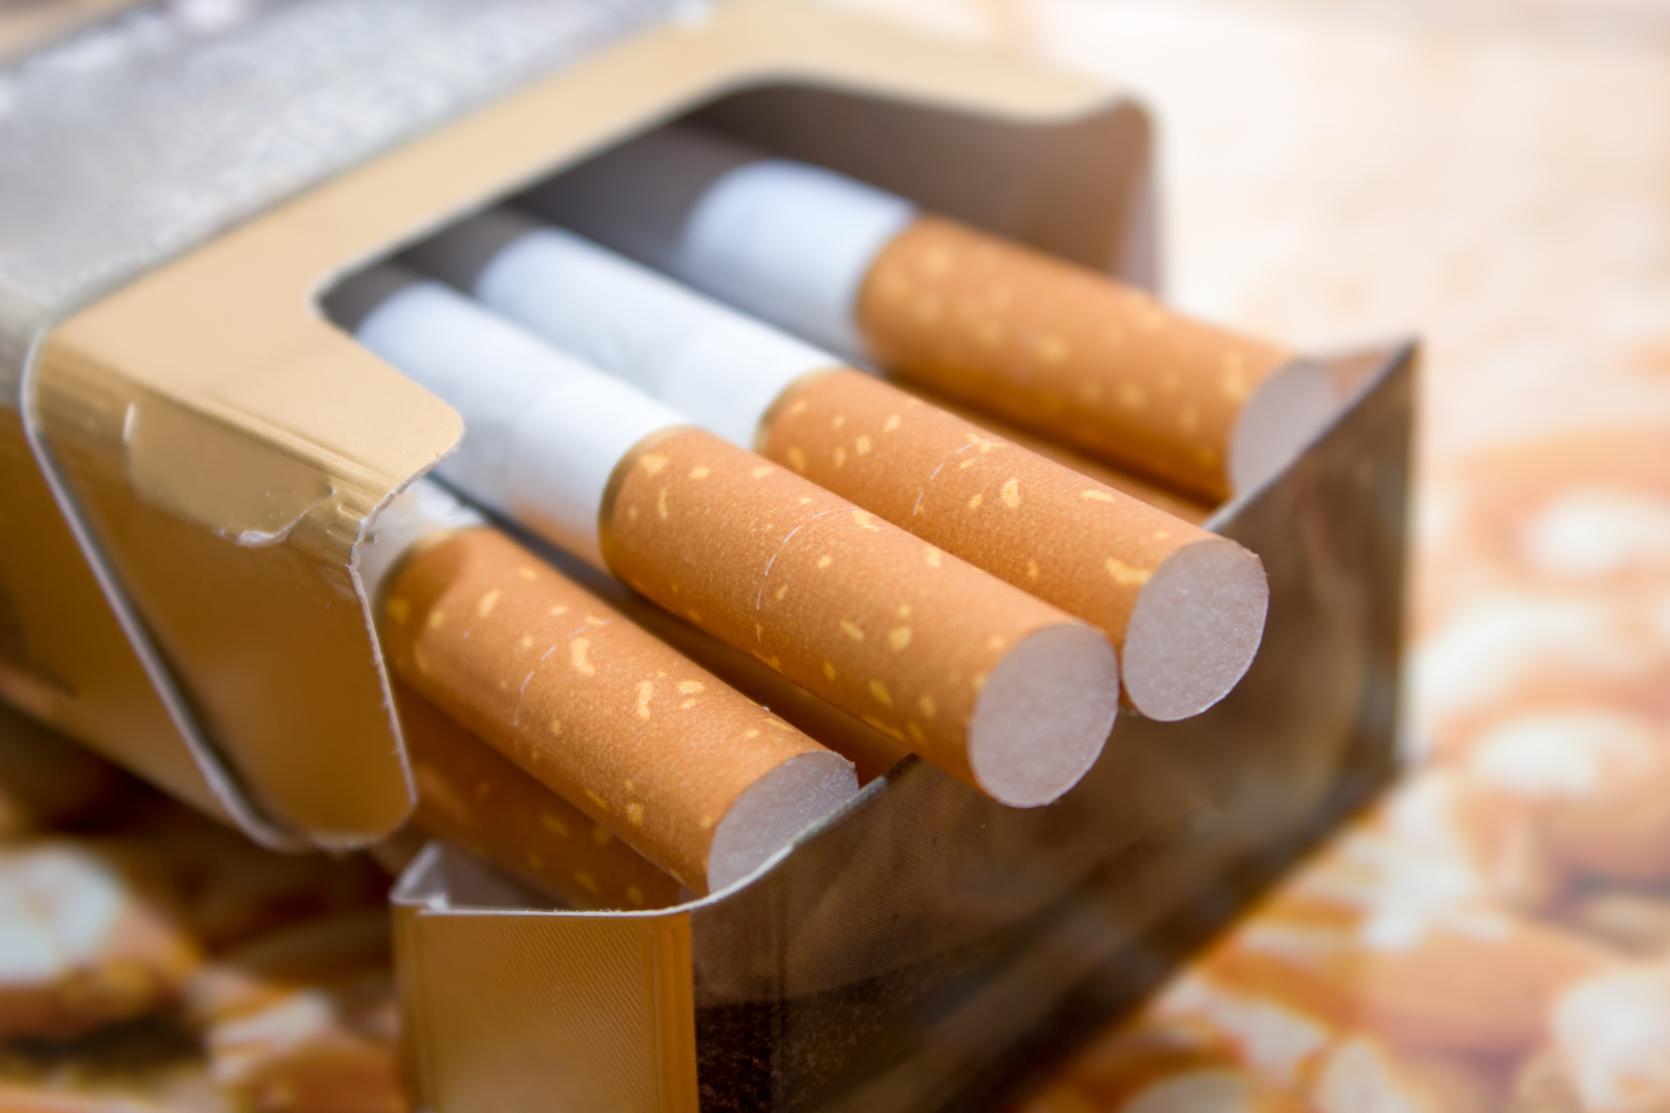 Photo of cigarettes in a package with an up close view